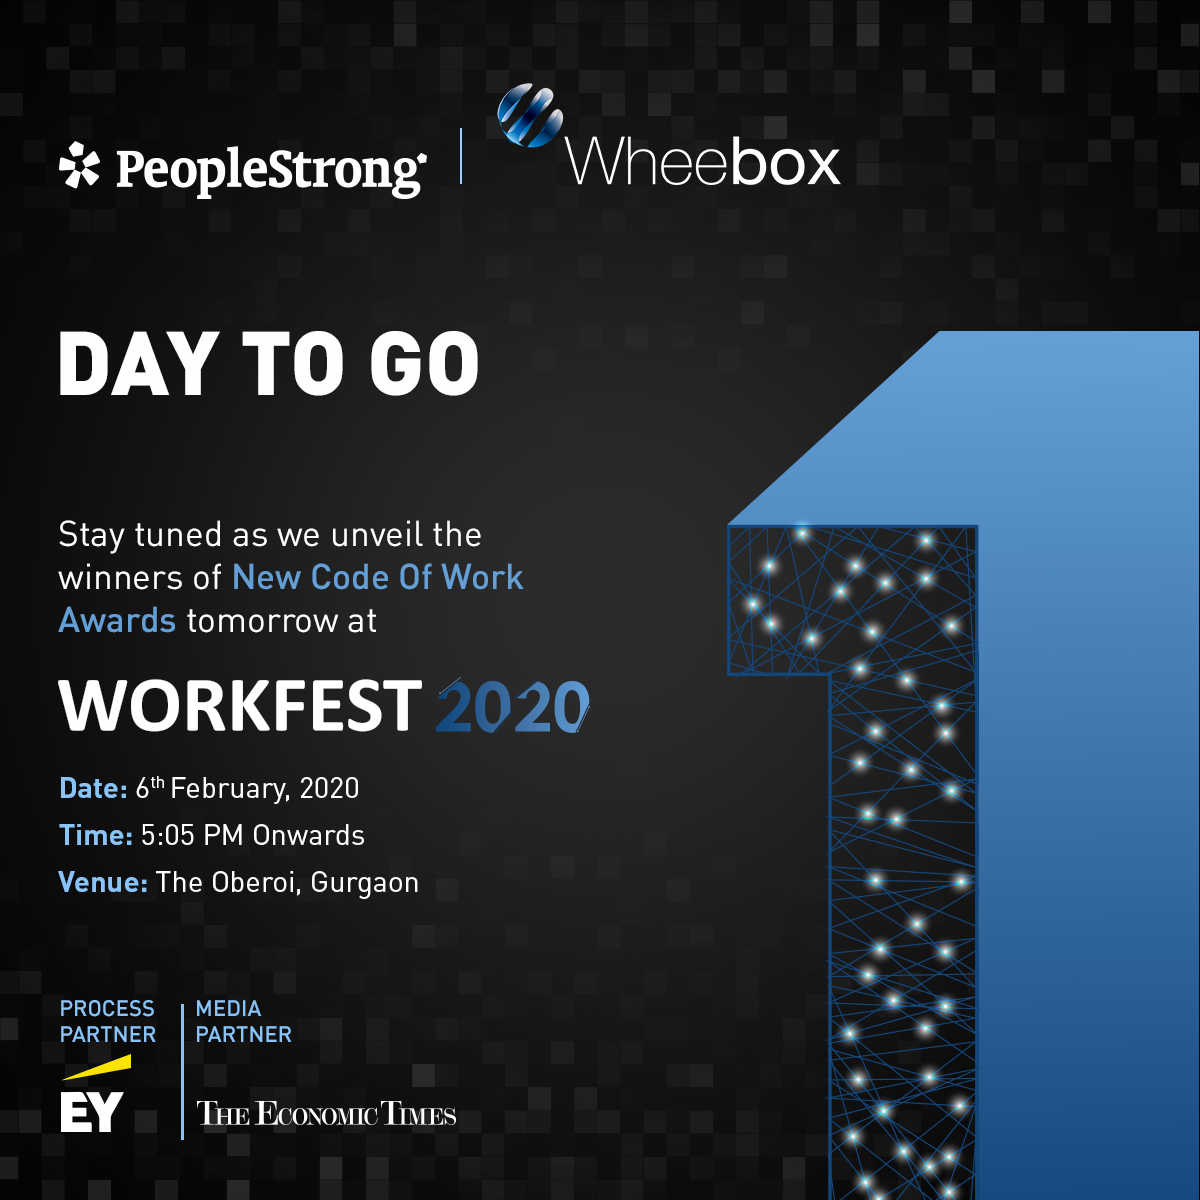 Stay tuned as we unveil the winners of the New Code Of Work Awards tomorrow at our gala event Workfest 2020 at The Oberoi, Gurugram. bit.ly/2RfpcEE #workfest2020 #worktech #HRTech #futureofwork #NewCodeOfWork